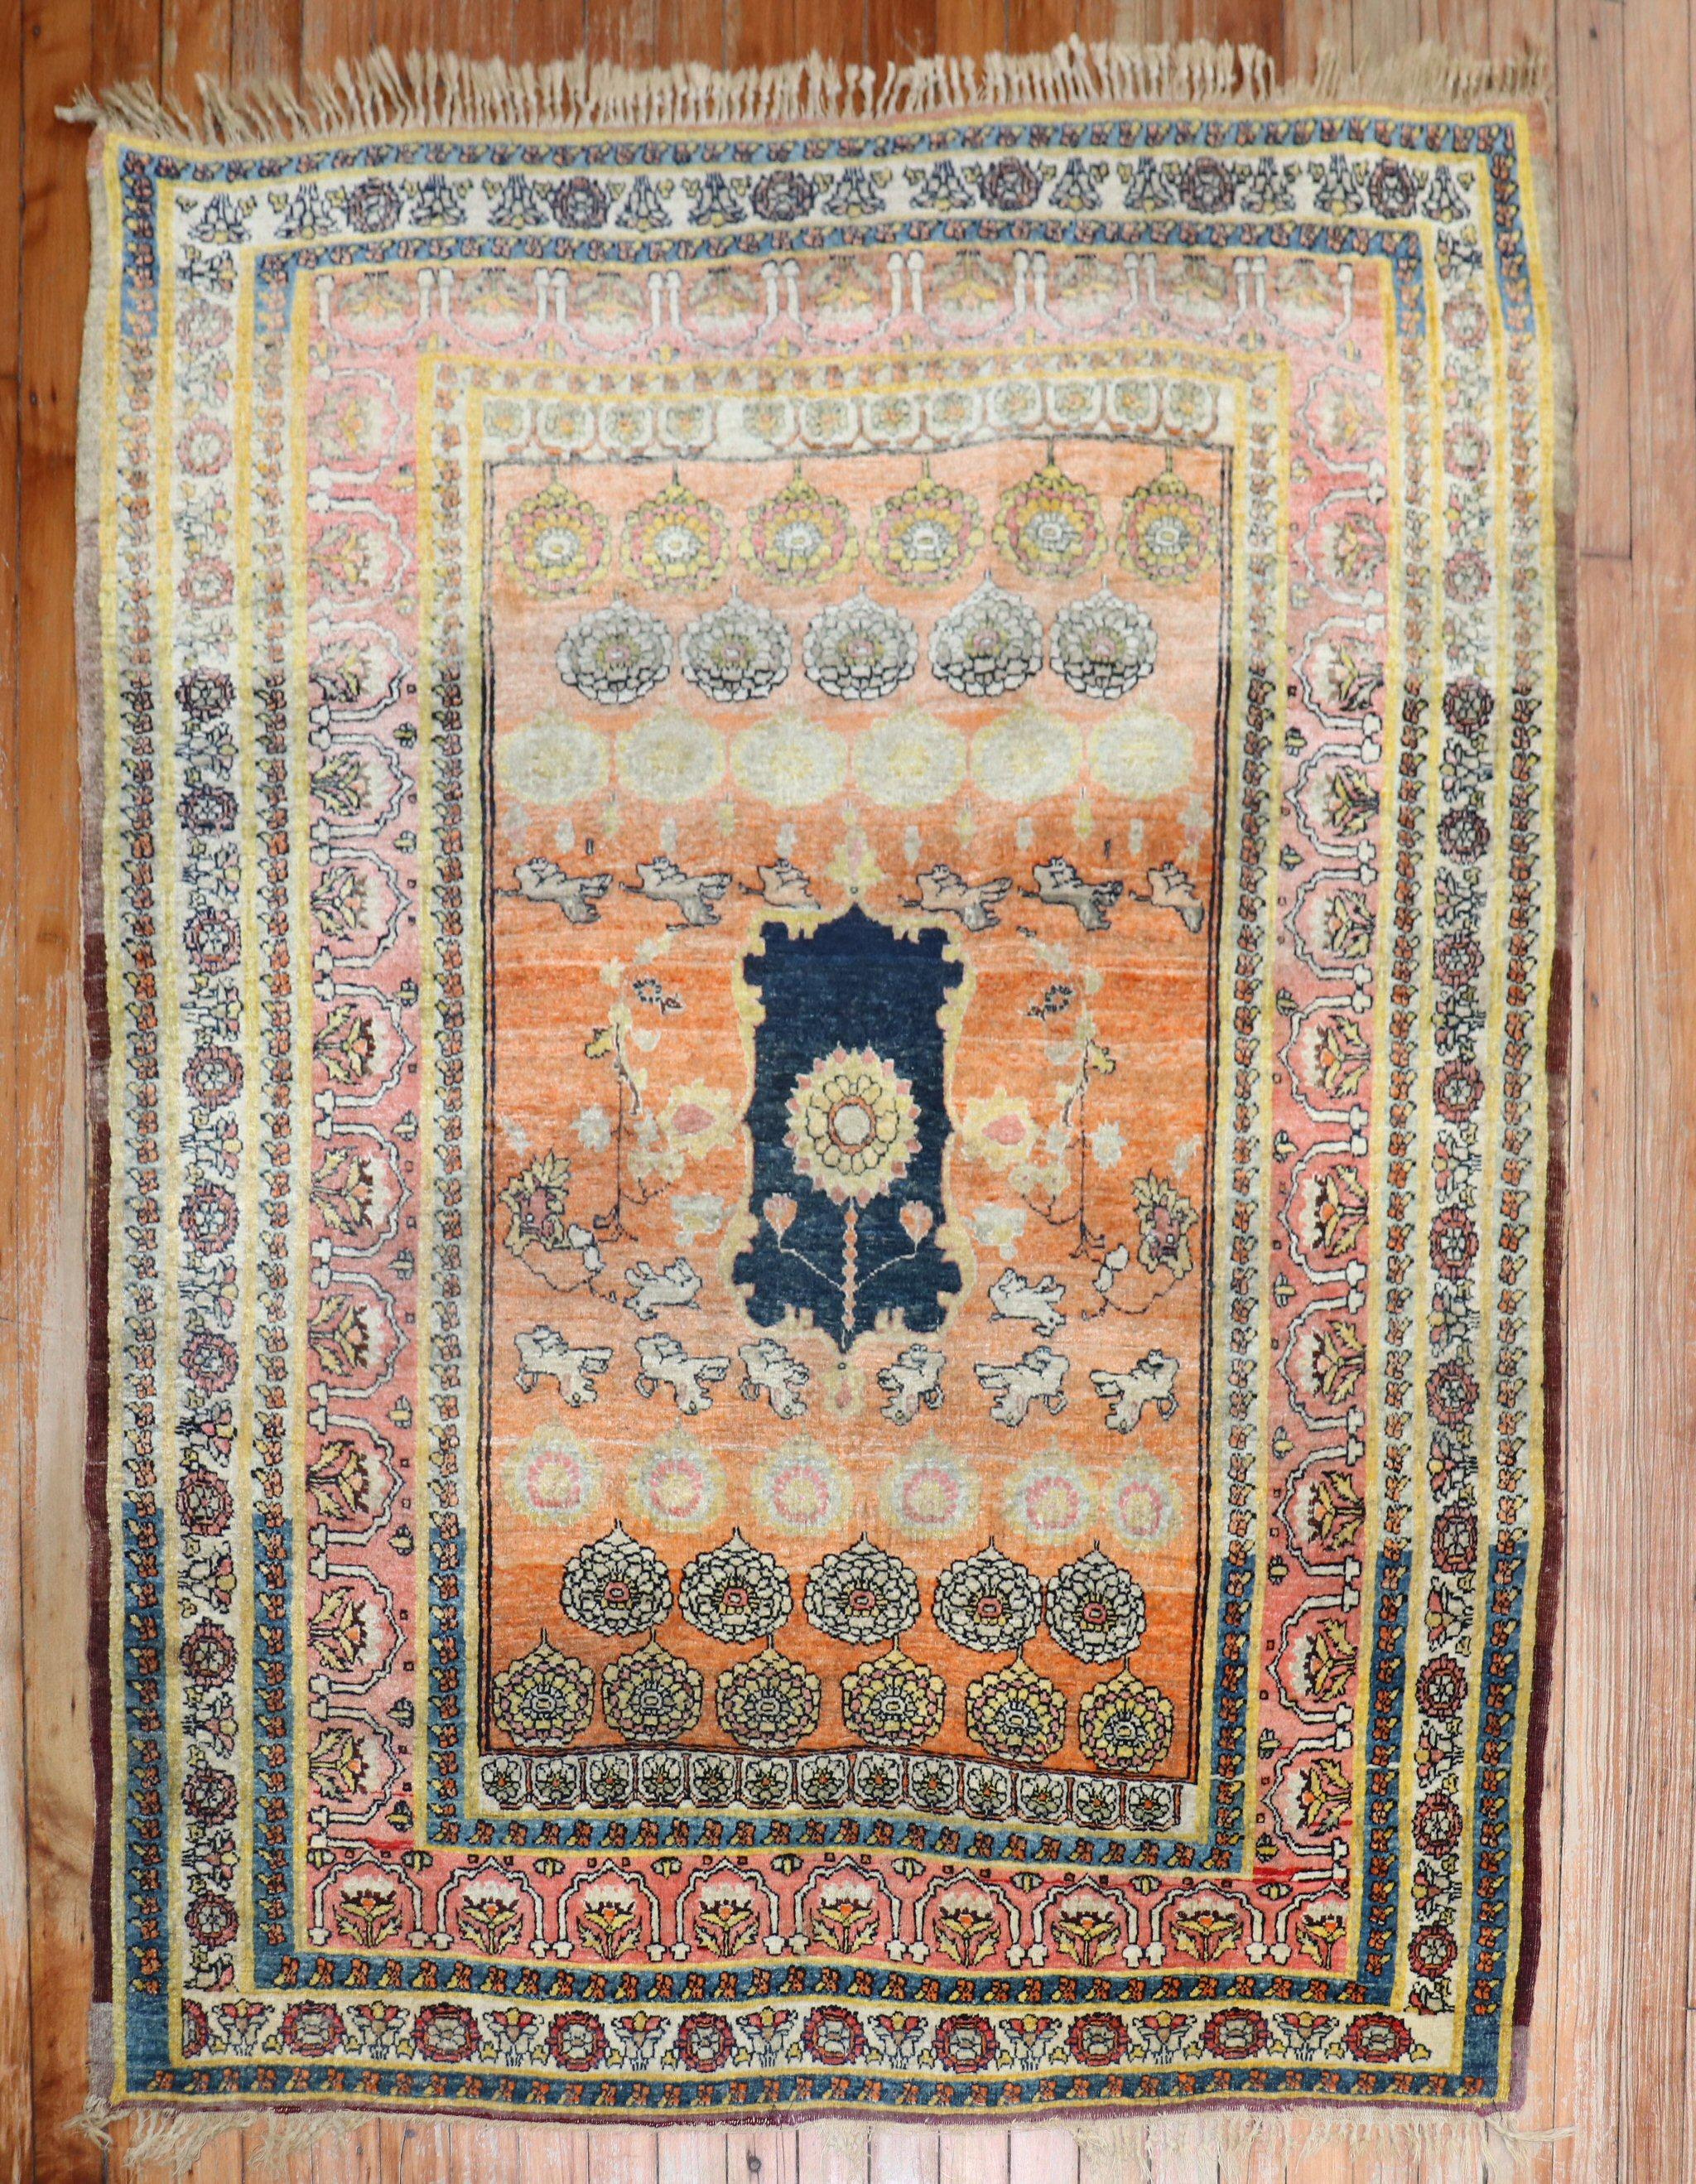 A remarkable late 19th-century pictorial Tabriz rug woven by Hadji Jalili workshop. The most interesting element f the rug are the puppies woven in the middle of the rug. The multiple borders are also extremely captivating. The weave, craftsmanship,